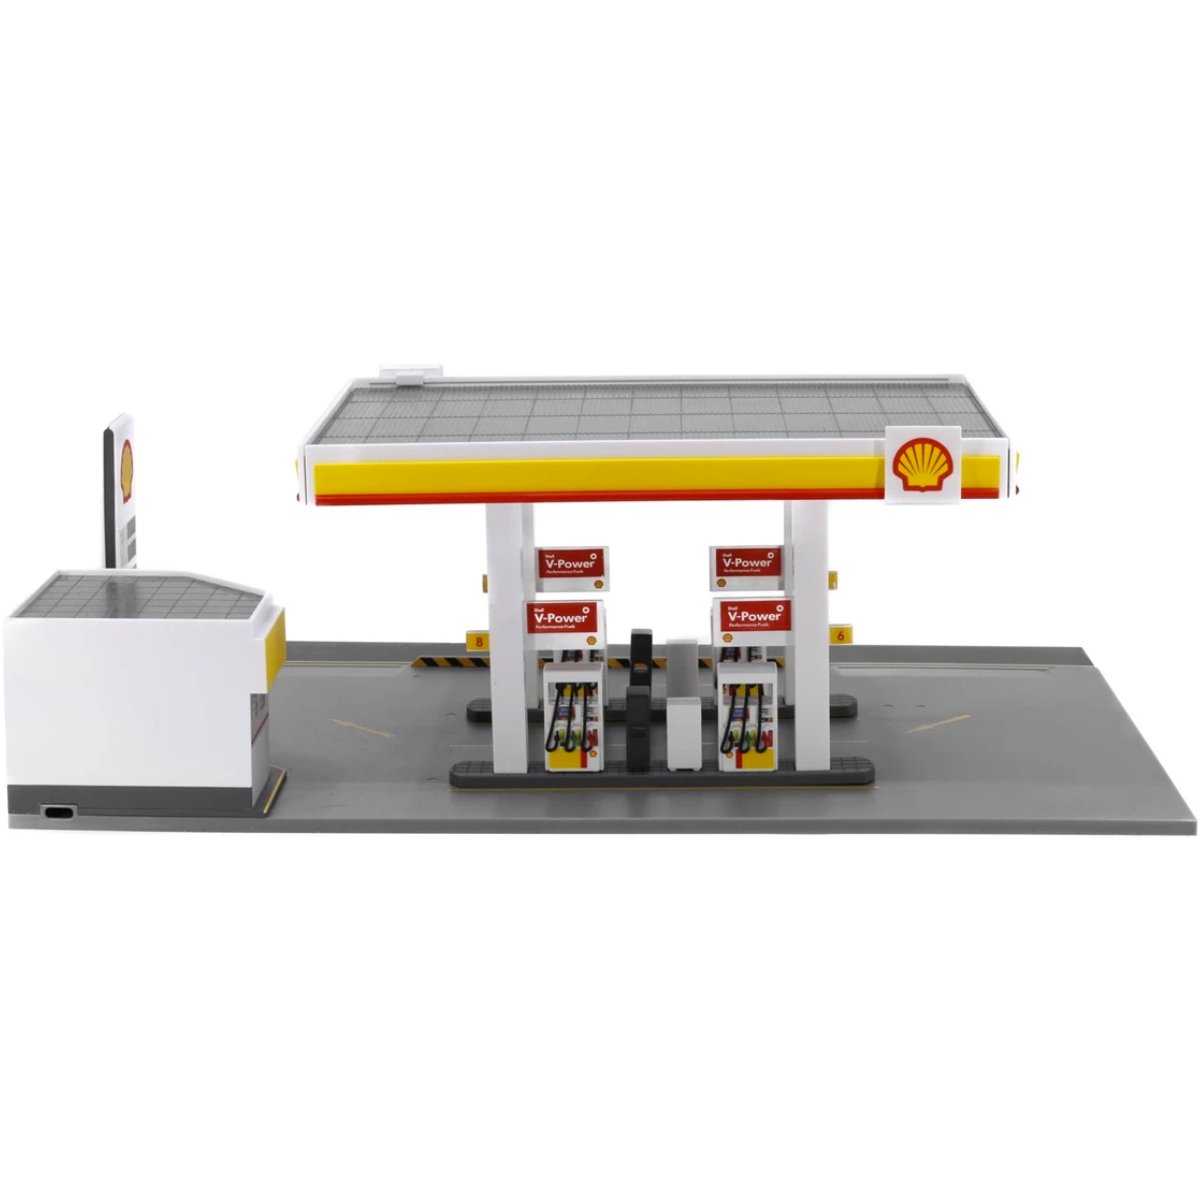 Tiny Models Shell Petrol Station Diorama Playset (1:64 / 1:76 Scale) - Phillips Hobbies